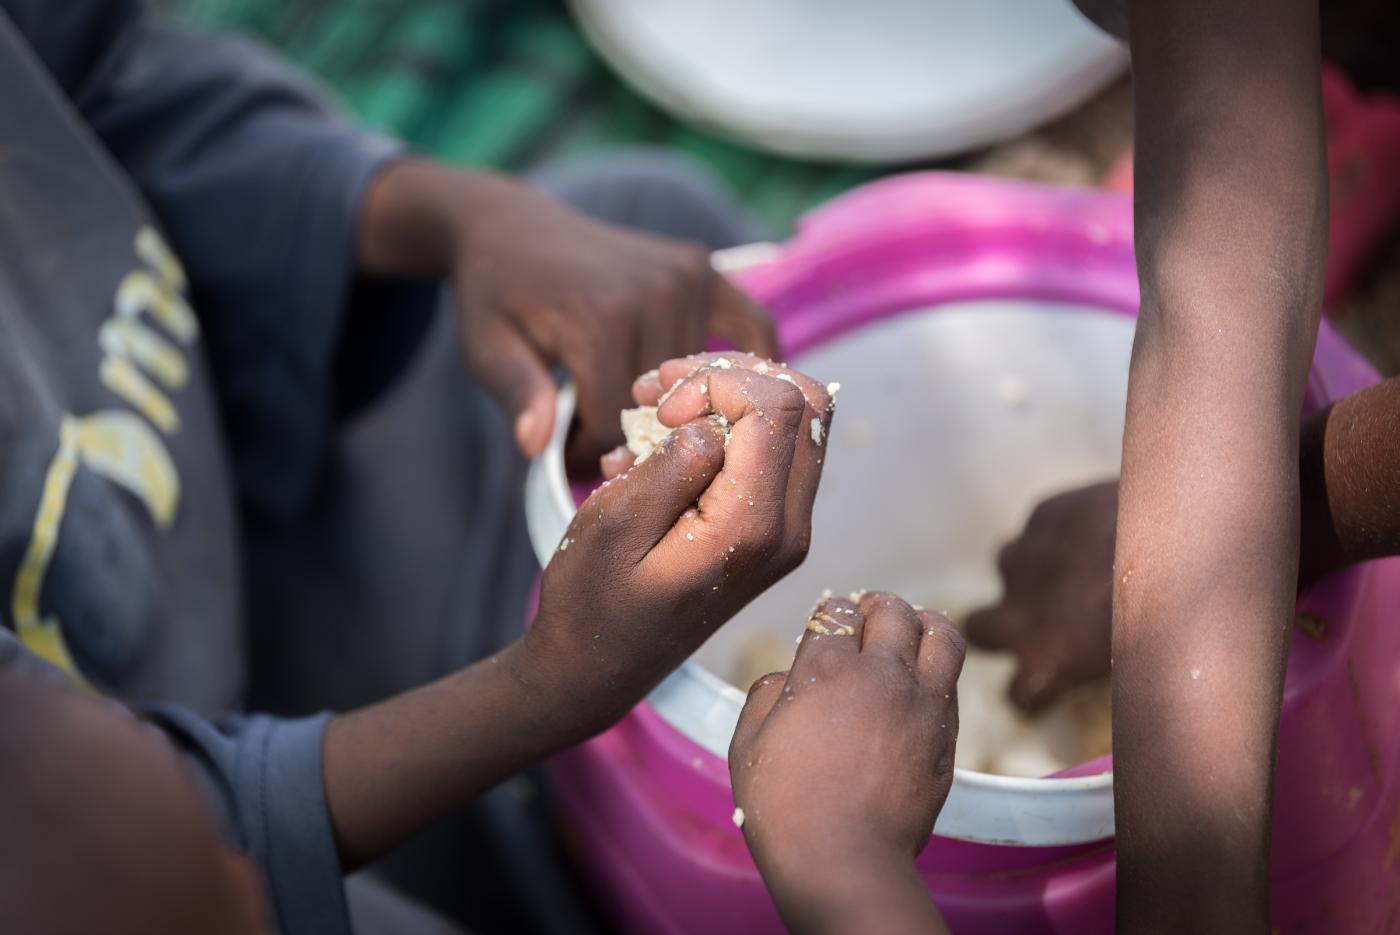 Children's hands seen grabbing hold of food from a pink plastic bowl. 